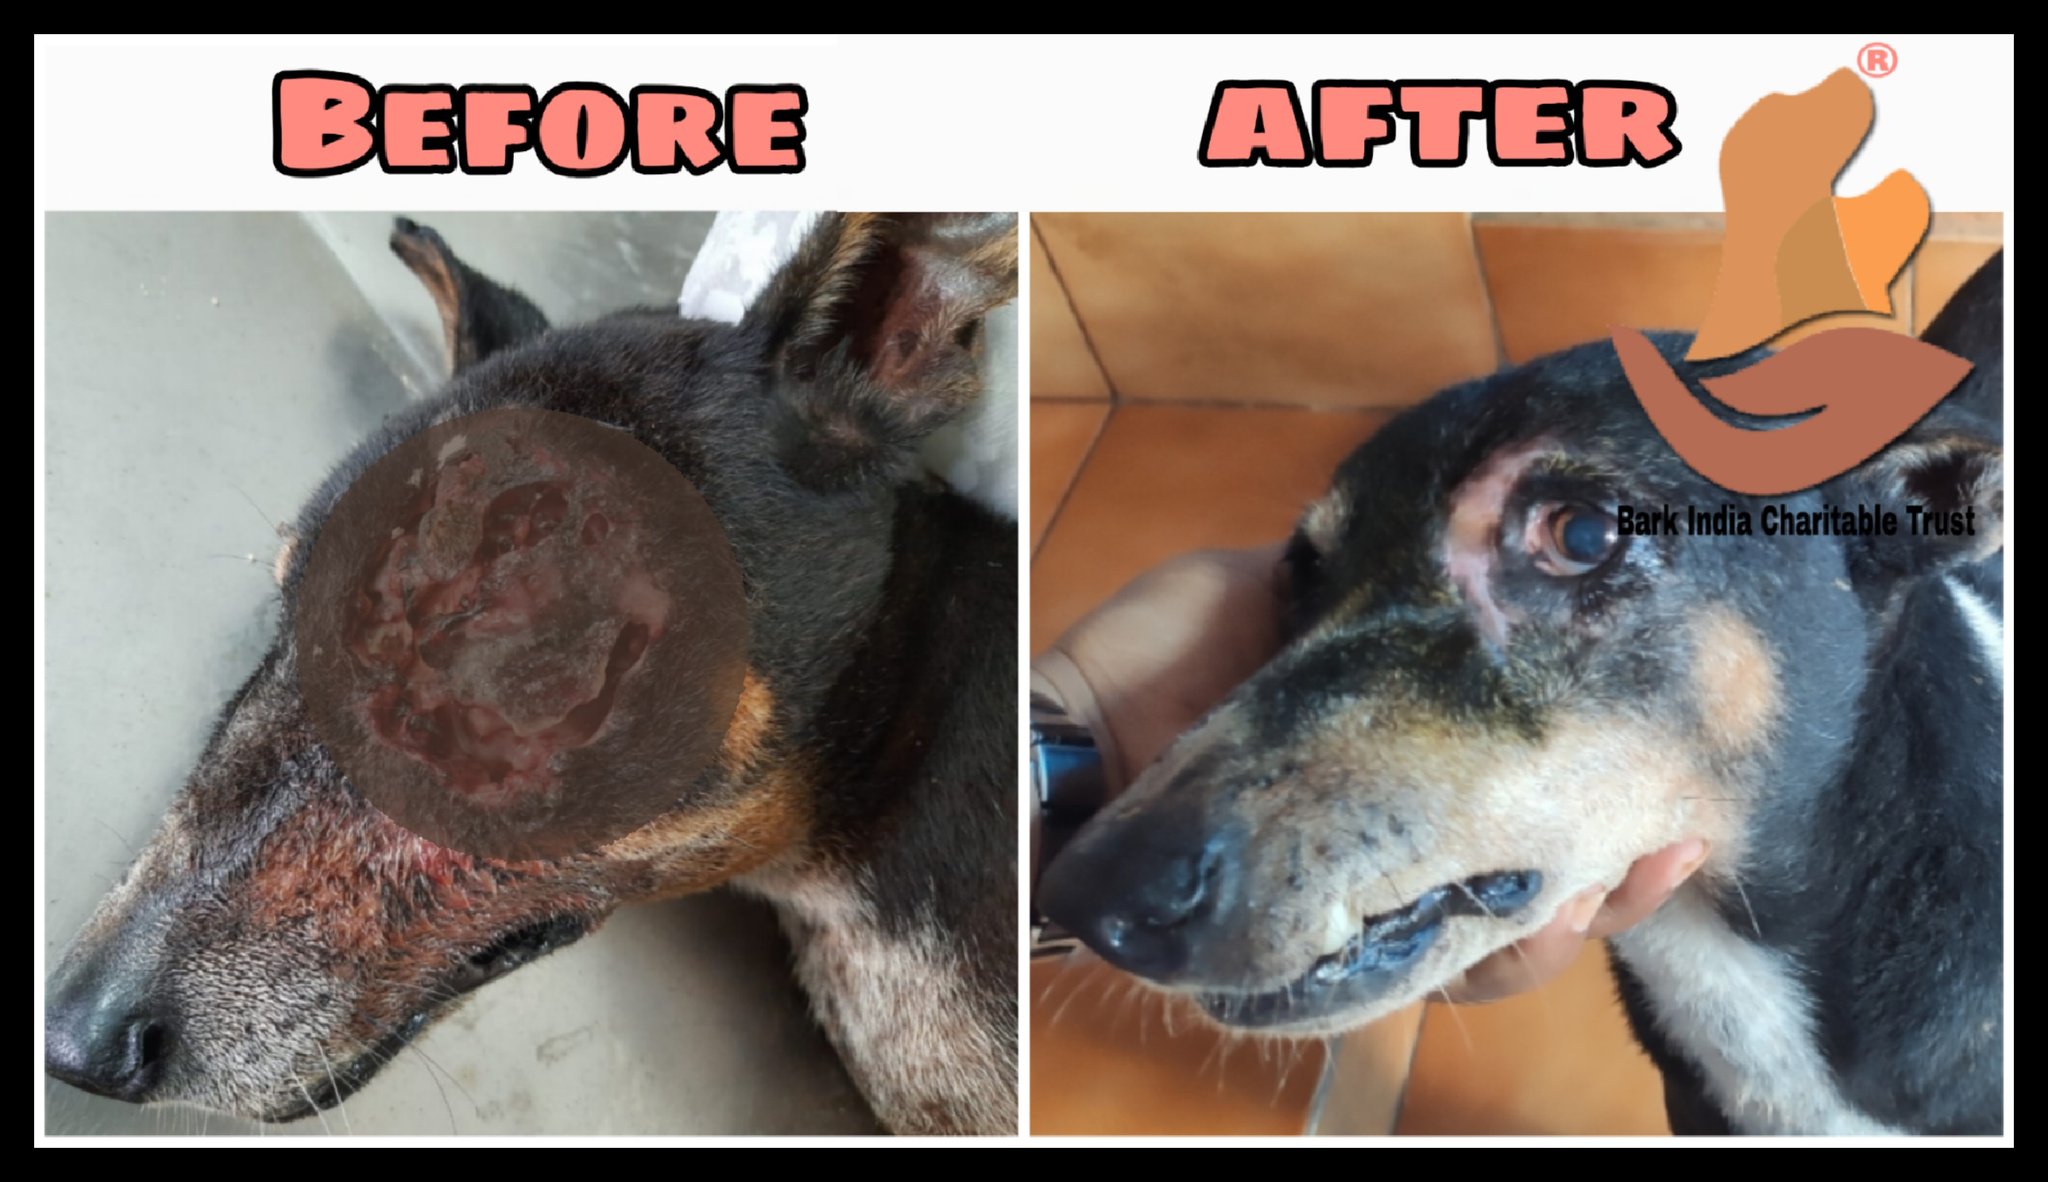 Bark India Charitable Trust on X: Street dog affected with maggot wound on  eye-before and after treatment at Bark India veterinary hospital.  #freeveterinarytreatment #dogrescuepondicherry #charityforanimals  #straydogrescue #animalrescueinindia